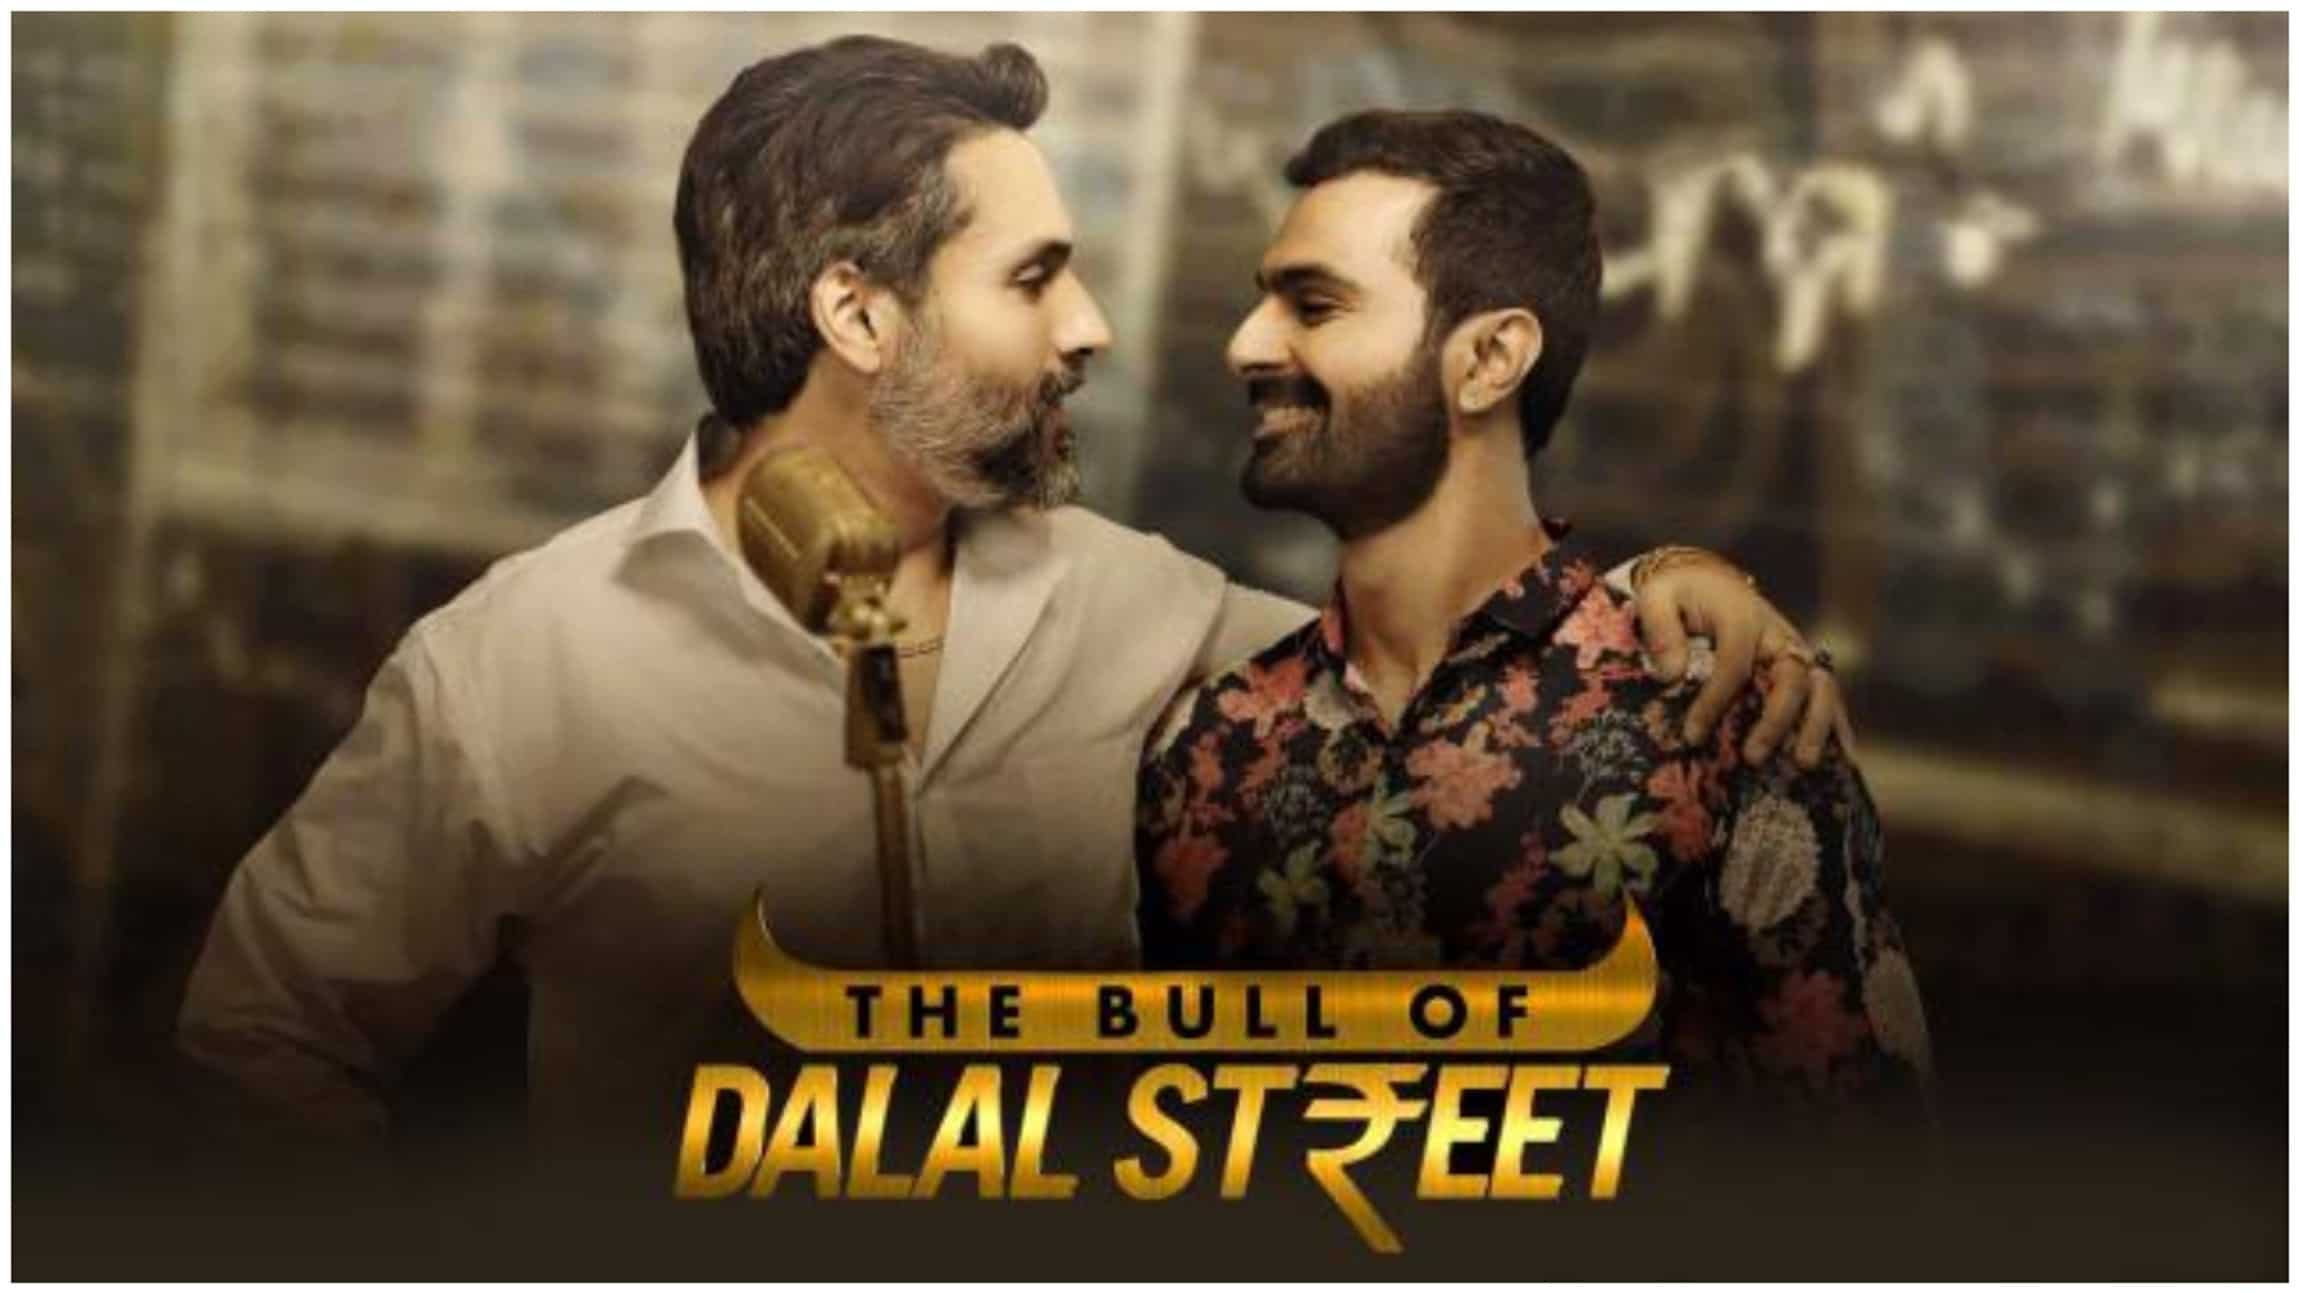 https://www.mobilemasala.com/movies/The-Bull-of-Dalal-Street-Here-is-why-the-Ullu-series-is-worth-your-attention-i275537